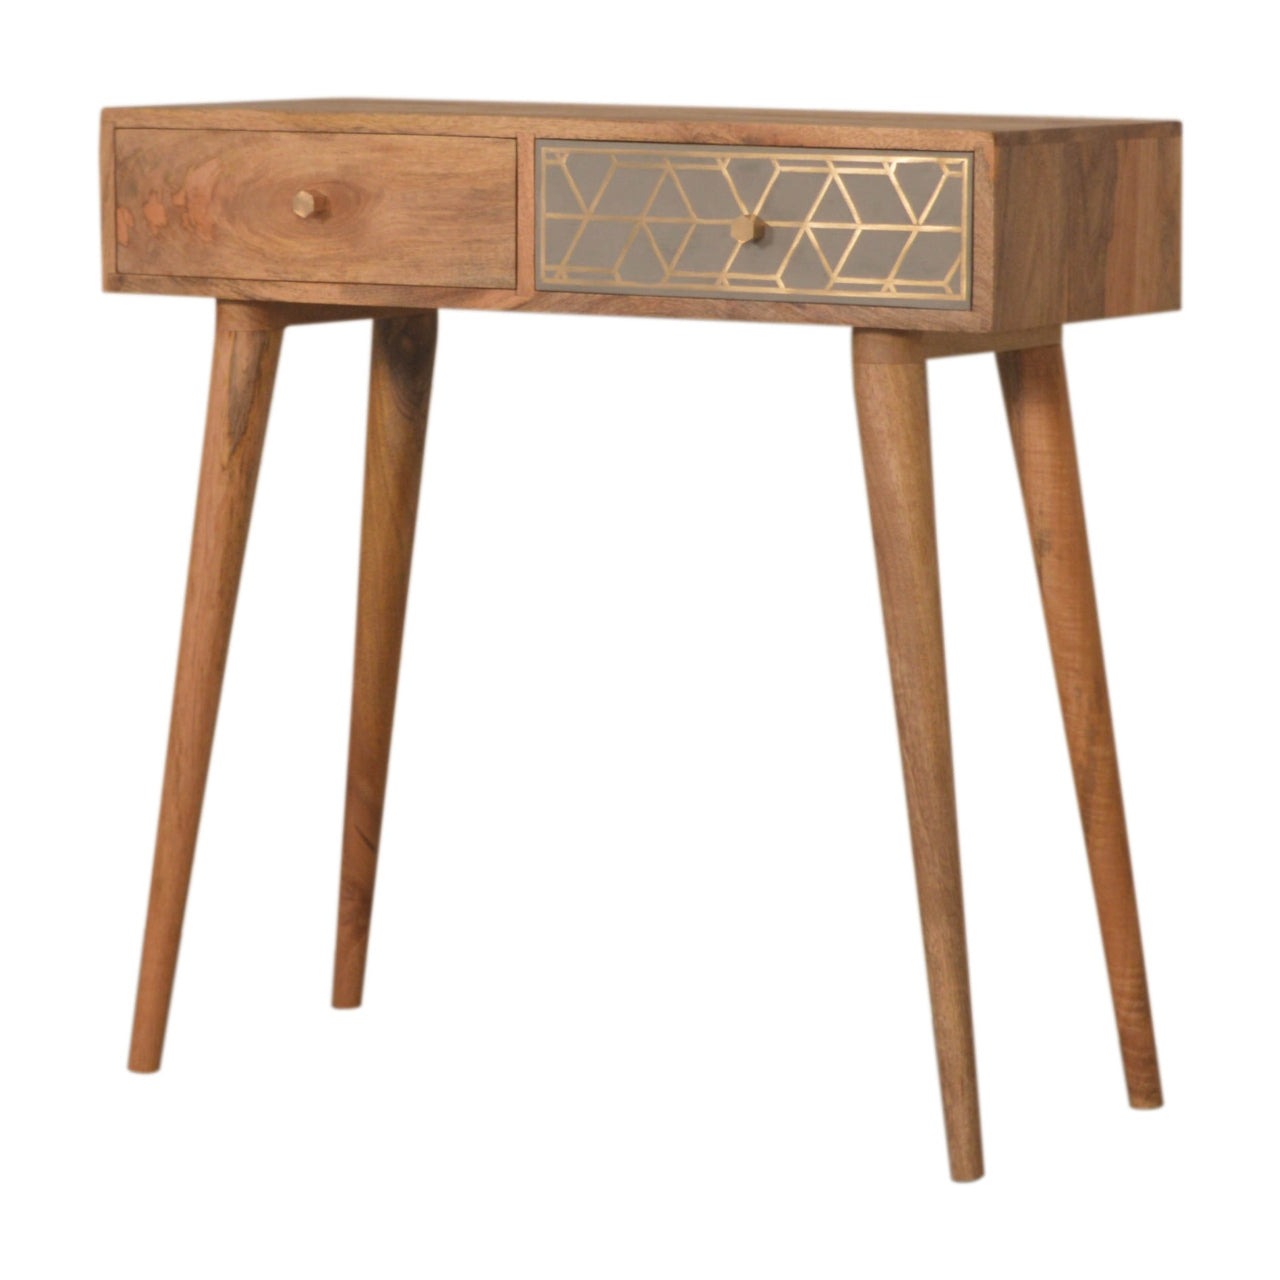 Dice Console Table - mancavesuperstore